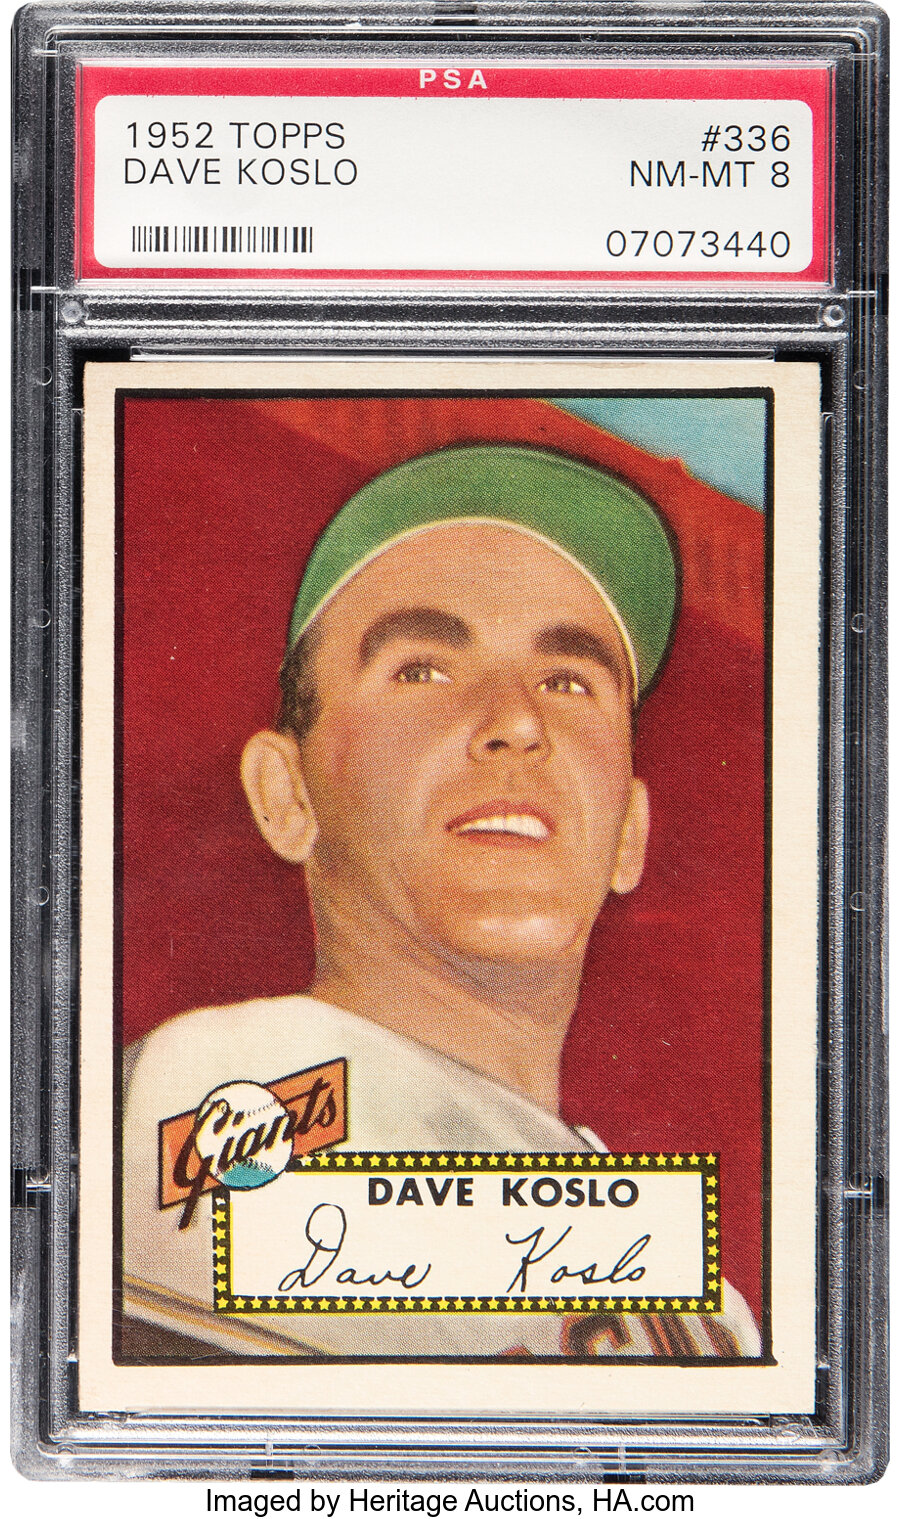 1952 Topps Dave Koslo #336 PSA NM-MT 8 - Only One Higher!